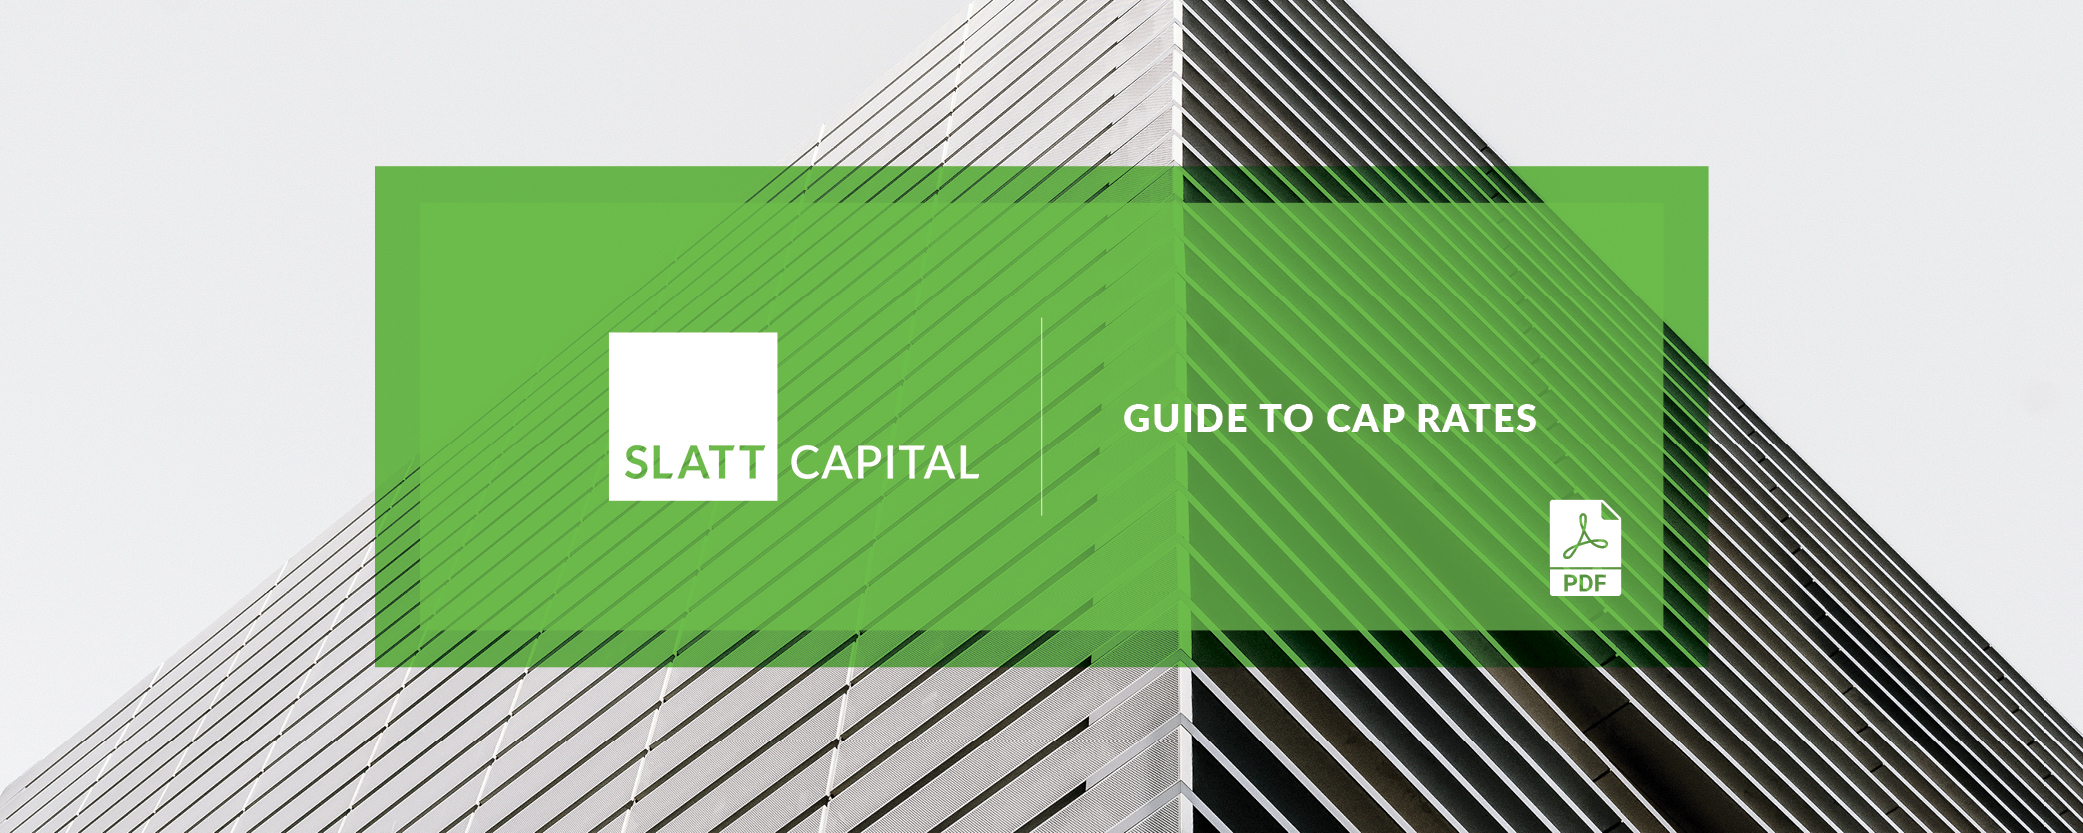 A Guide to Cap Rates